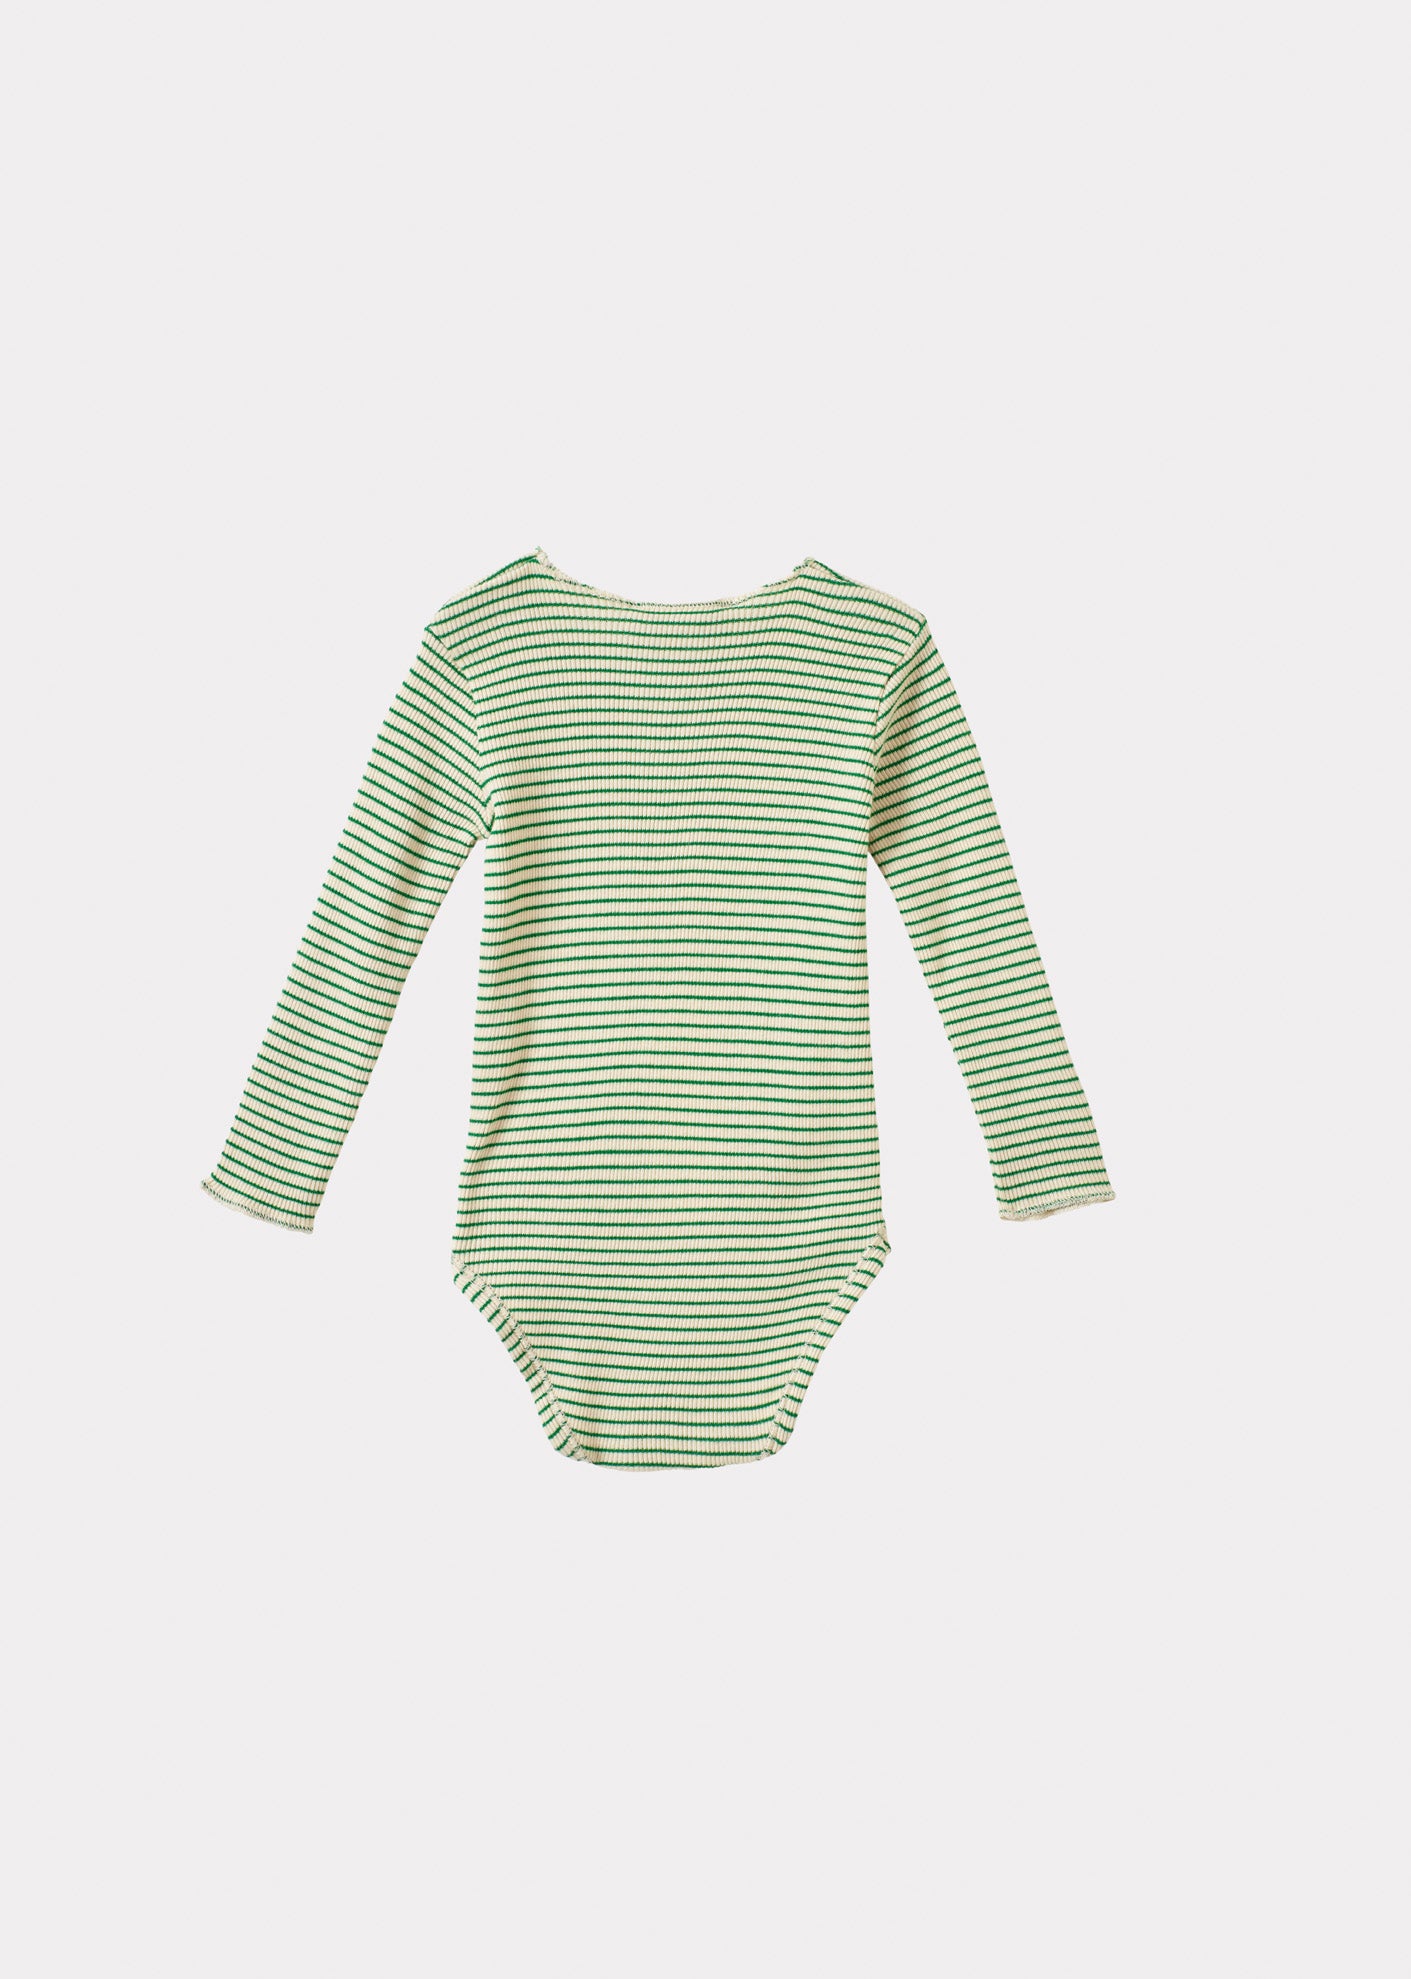 Buy Rompers & Jumpsuits for Babies Online | CARAMEL